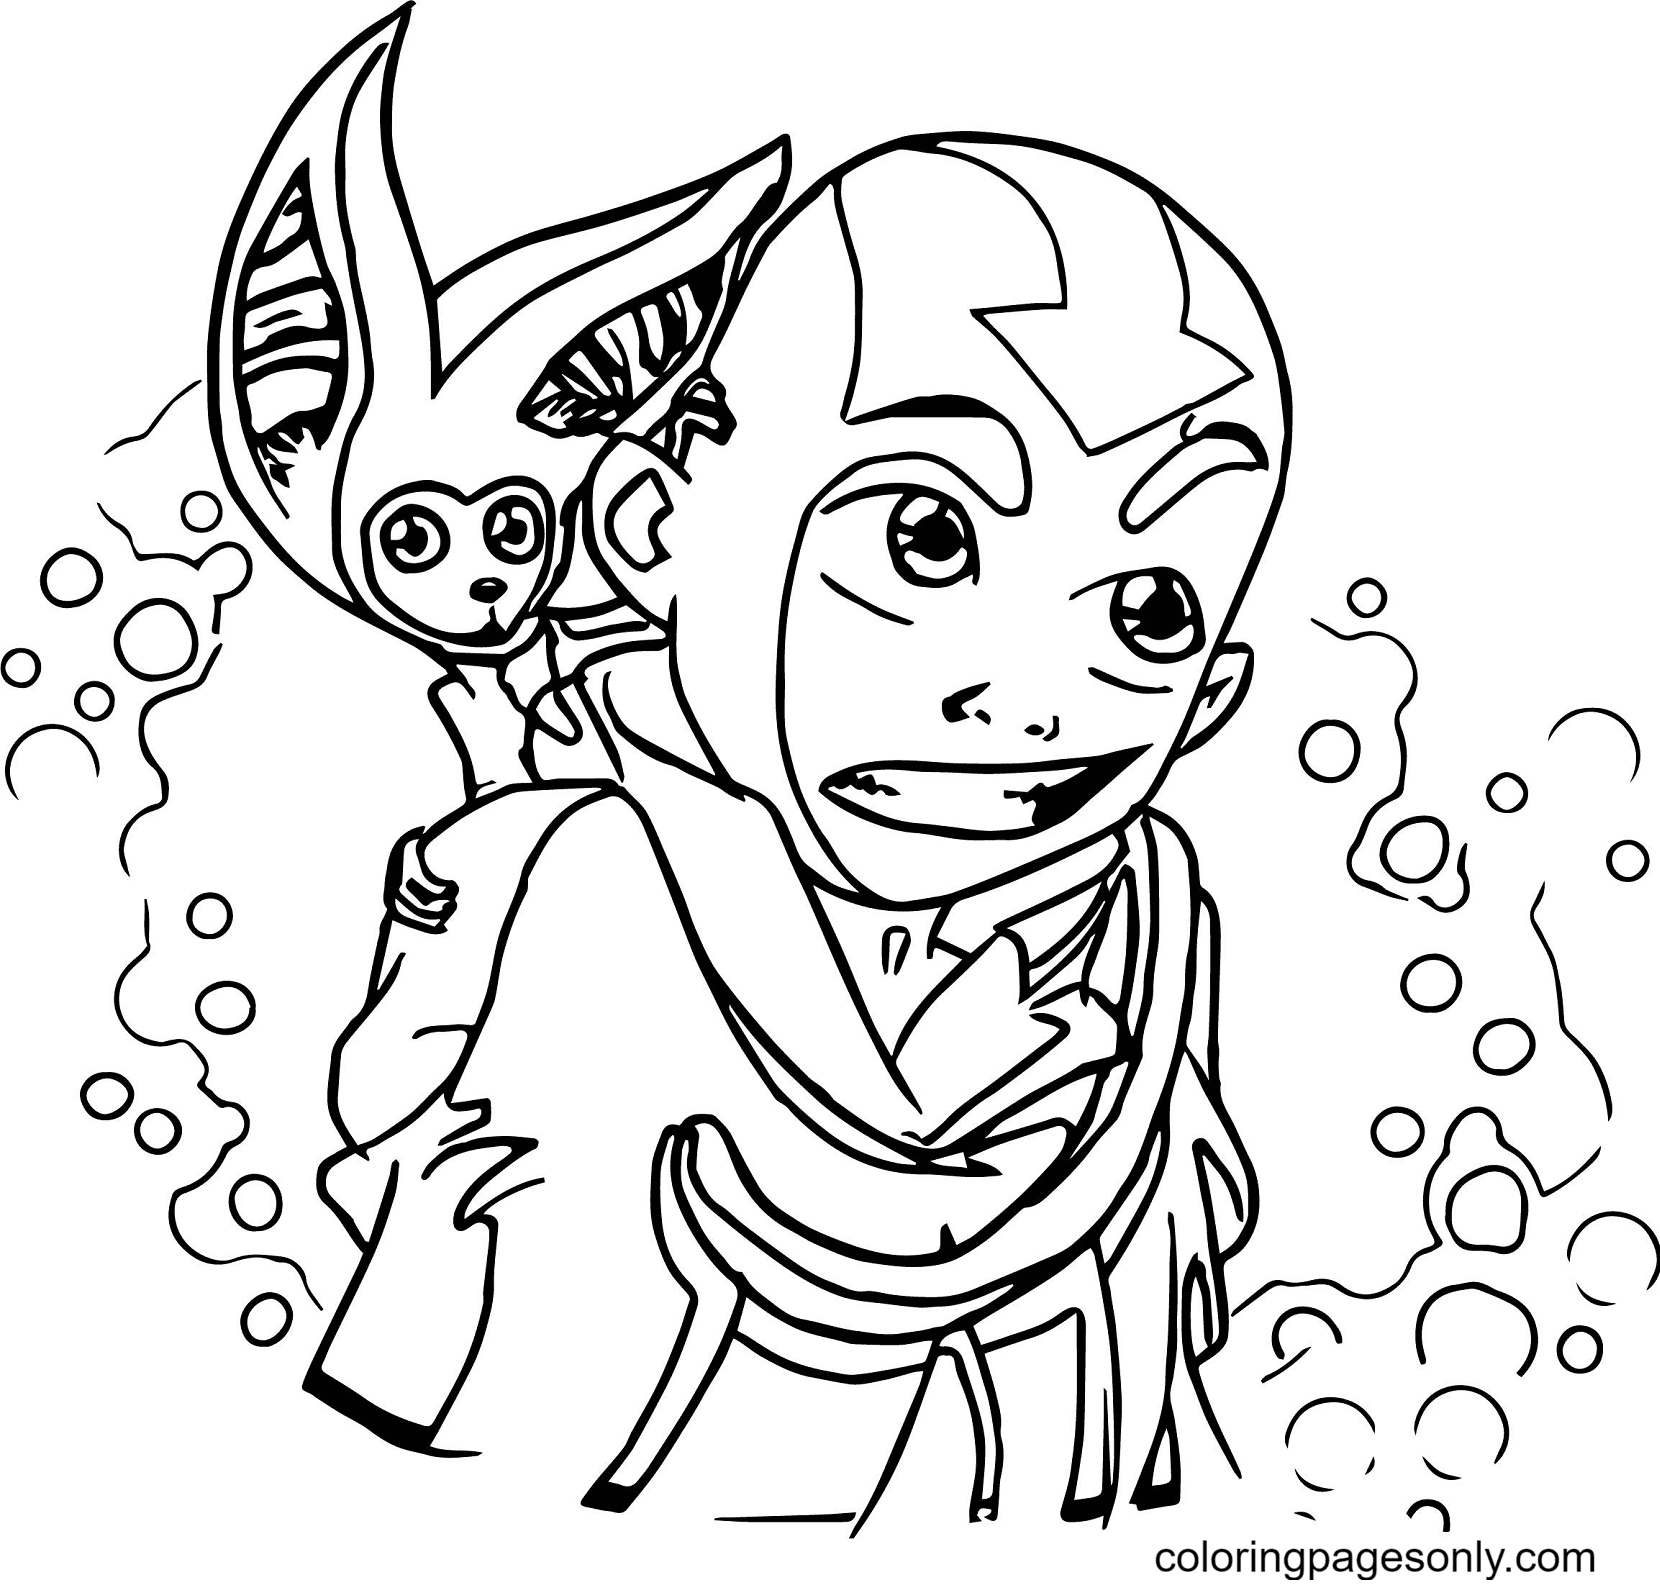 Aang And Momo from Avatar Coloring Pages